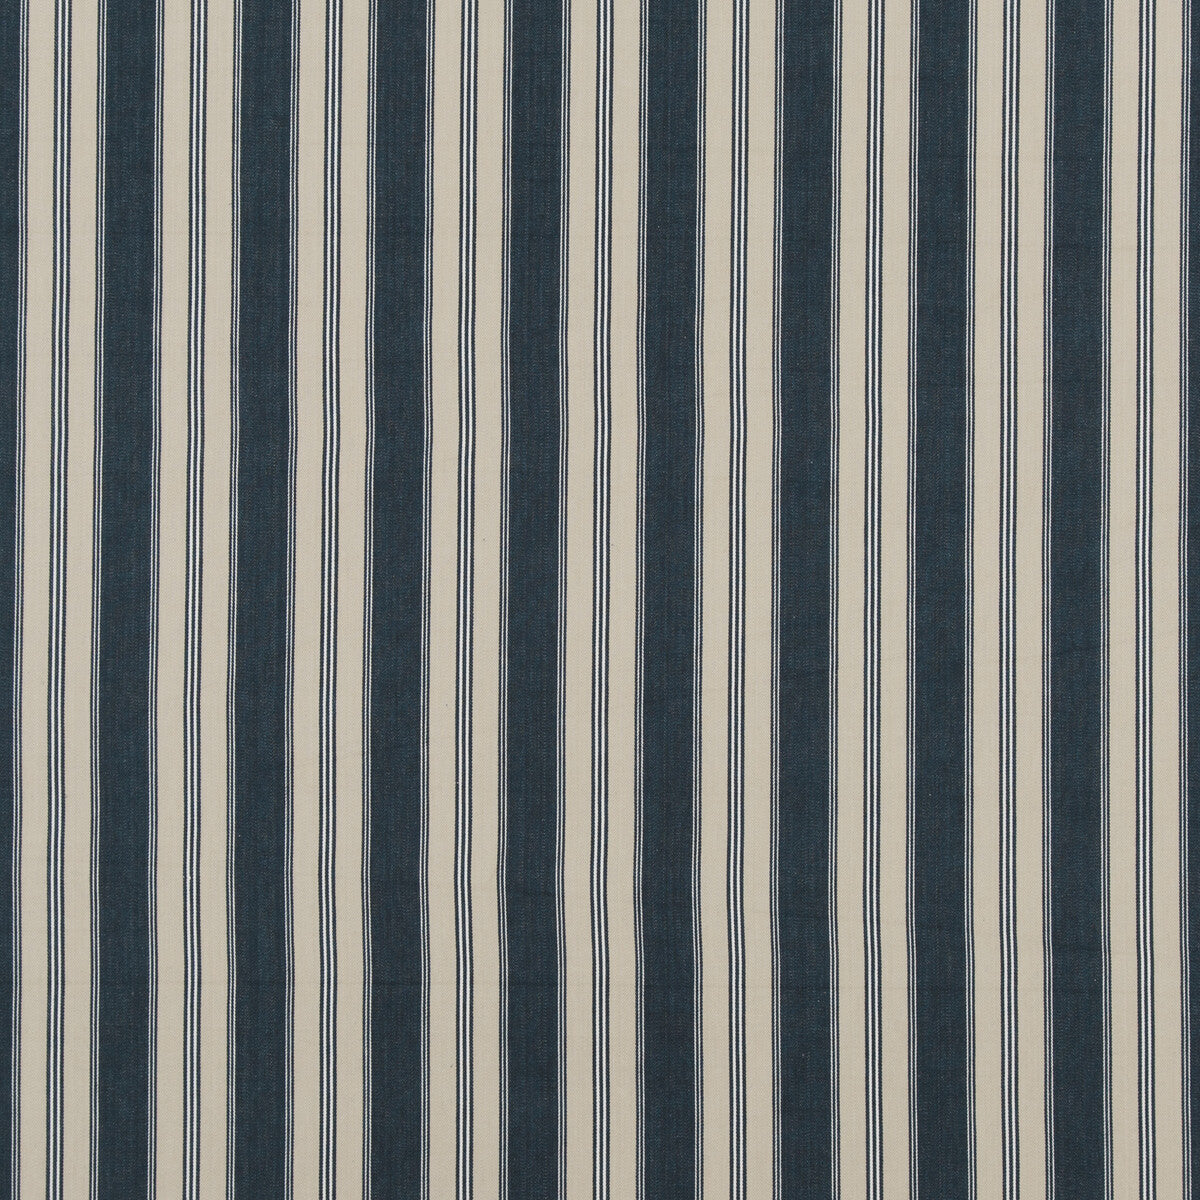 Tango Ticking fabric in indigo color - pattern PF50430.2.0 - by Baker Lifestyle in the Carnival collection